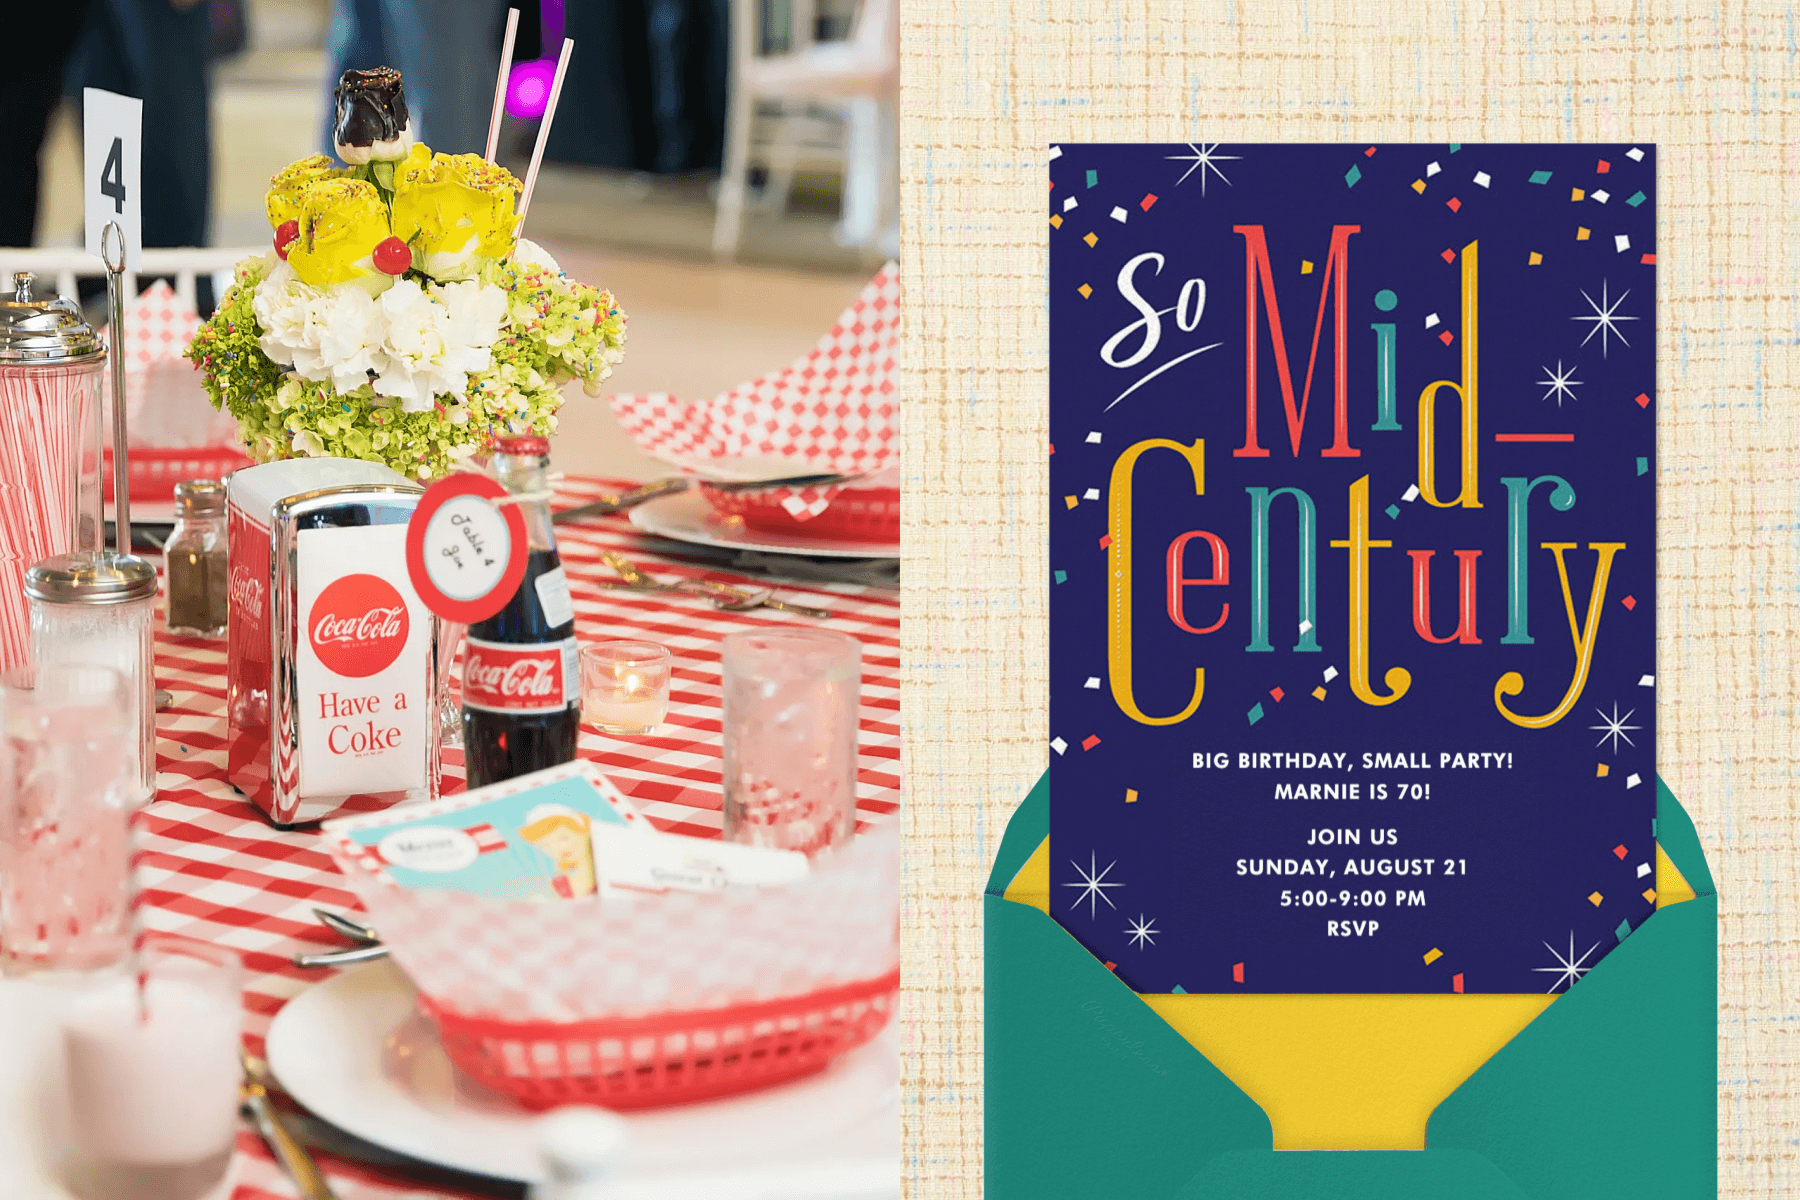  Left: retro themed tabletop with gingham supplies and Coke products; Right: midcentury invitation featuring the text “So Mid-Century”